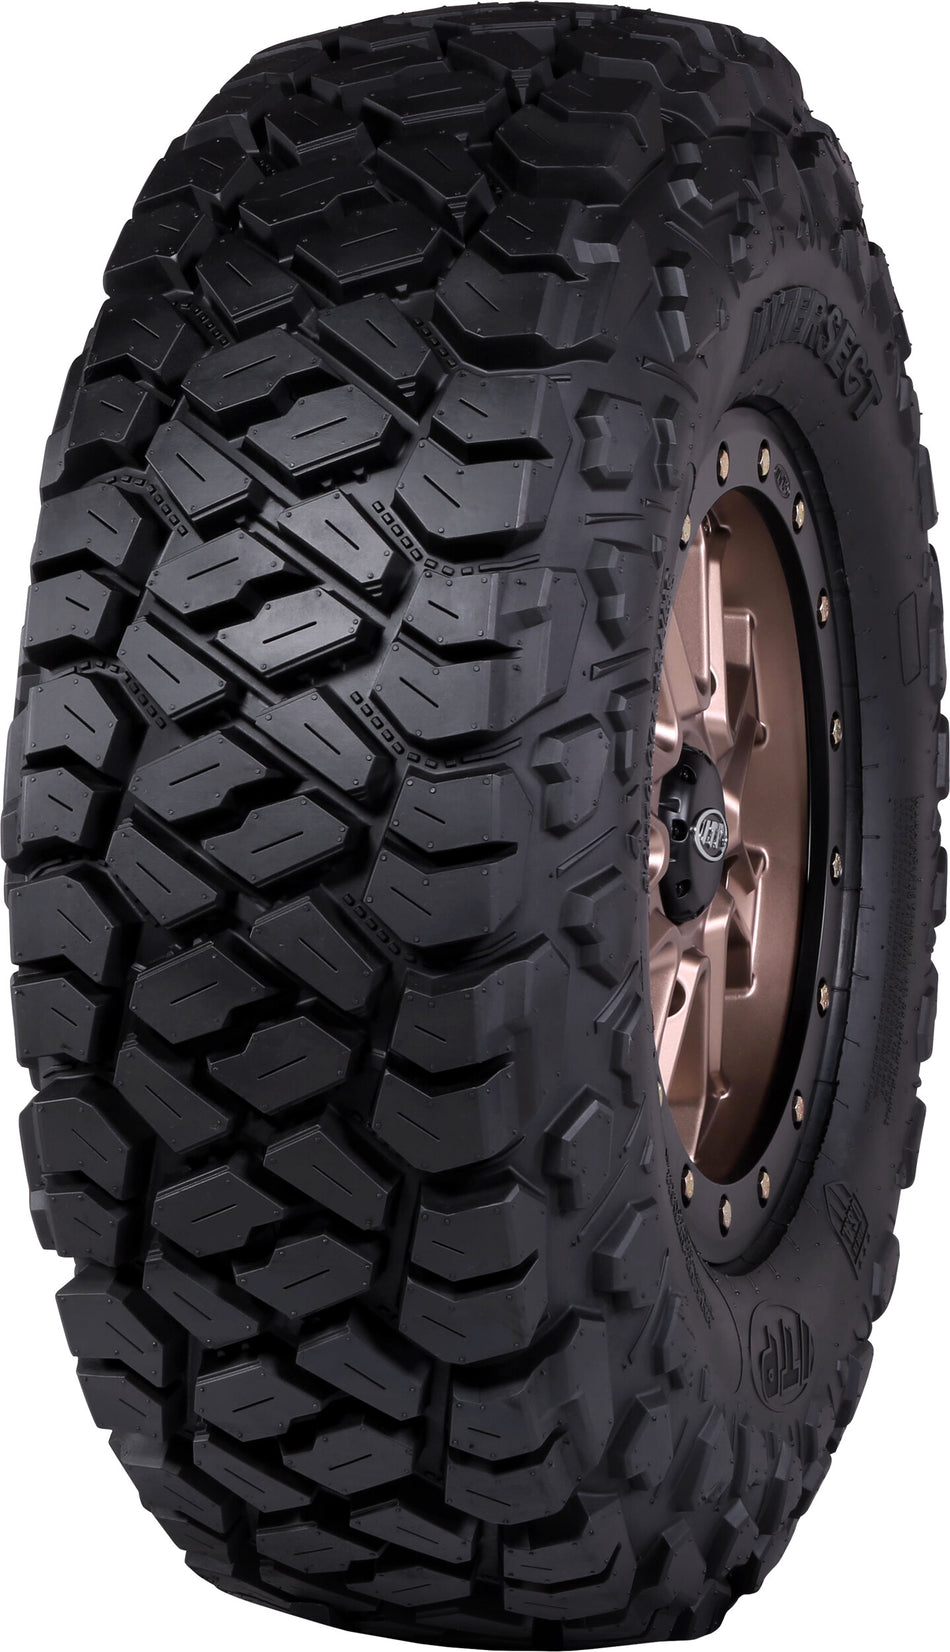 ITPTire Intersect Front/Rear 32x10r15 8-Ply6P1889